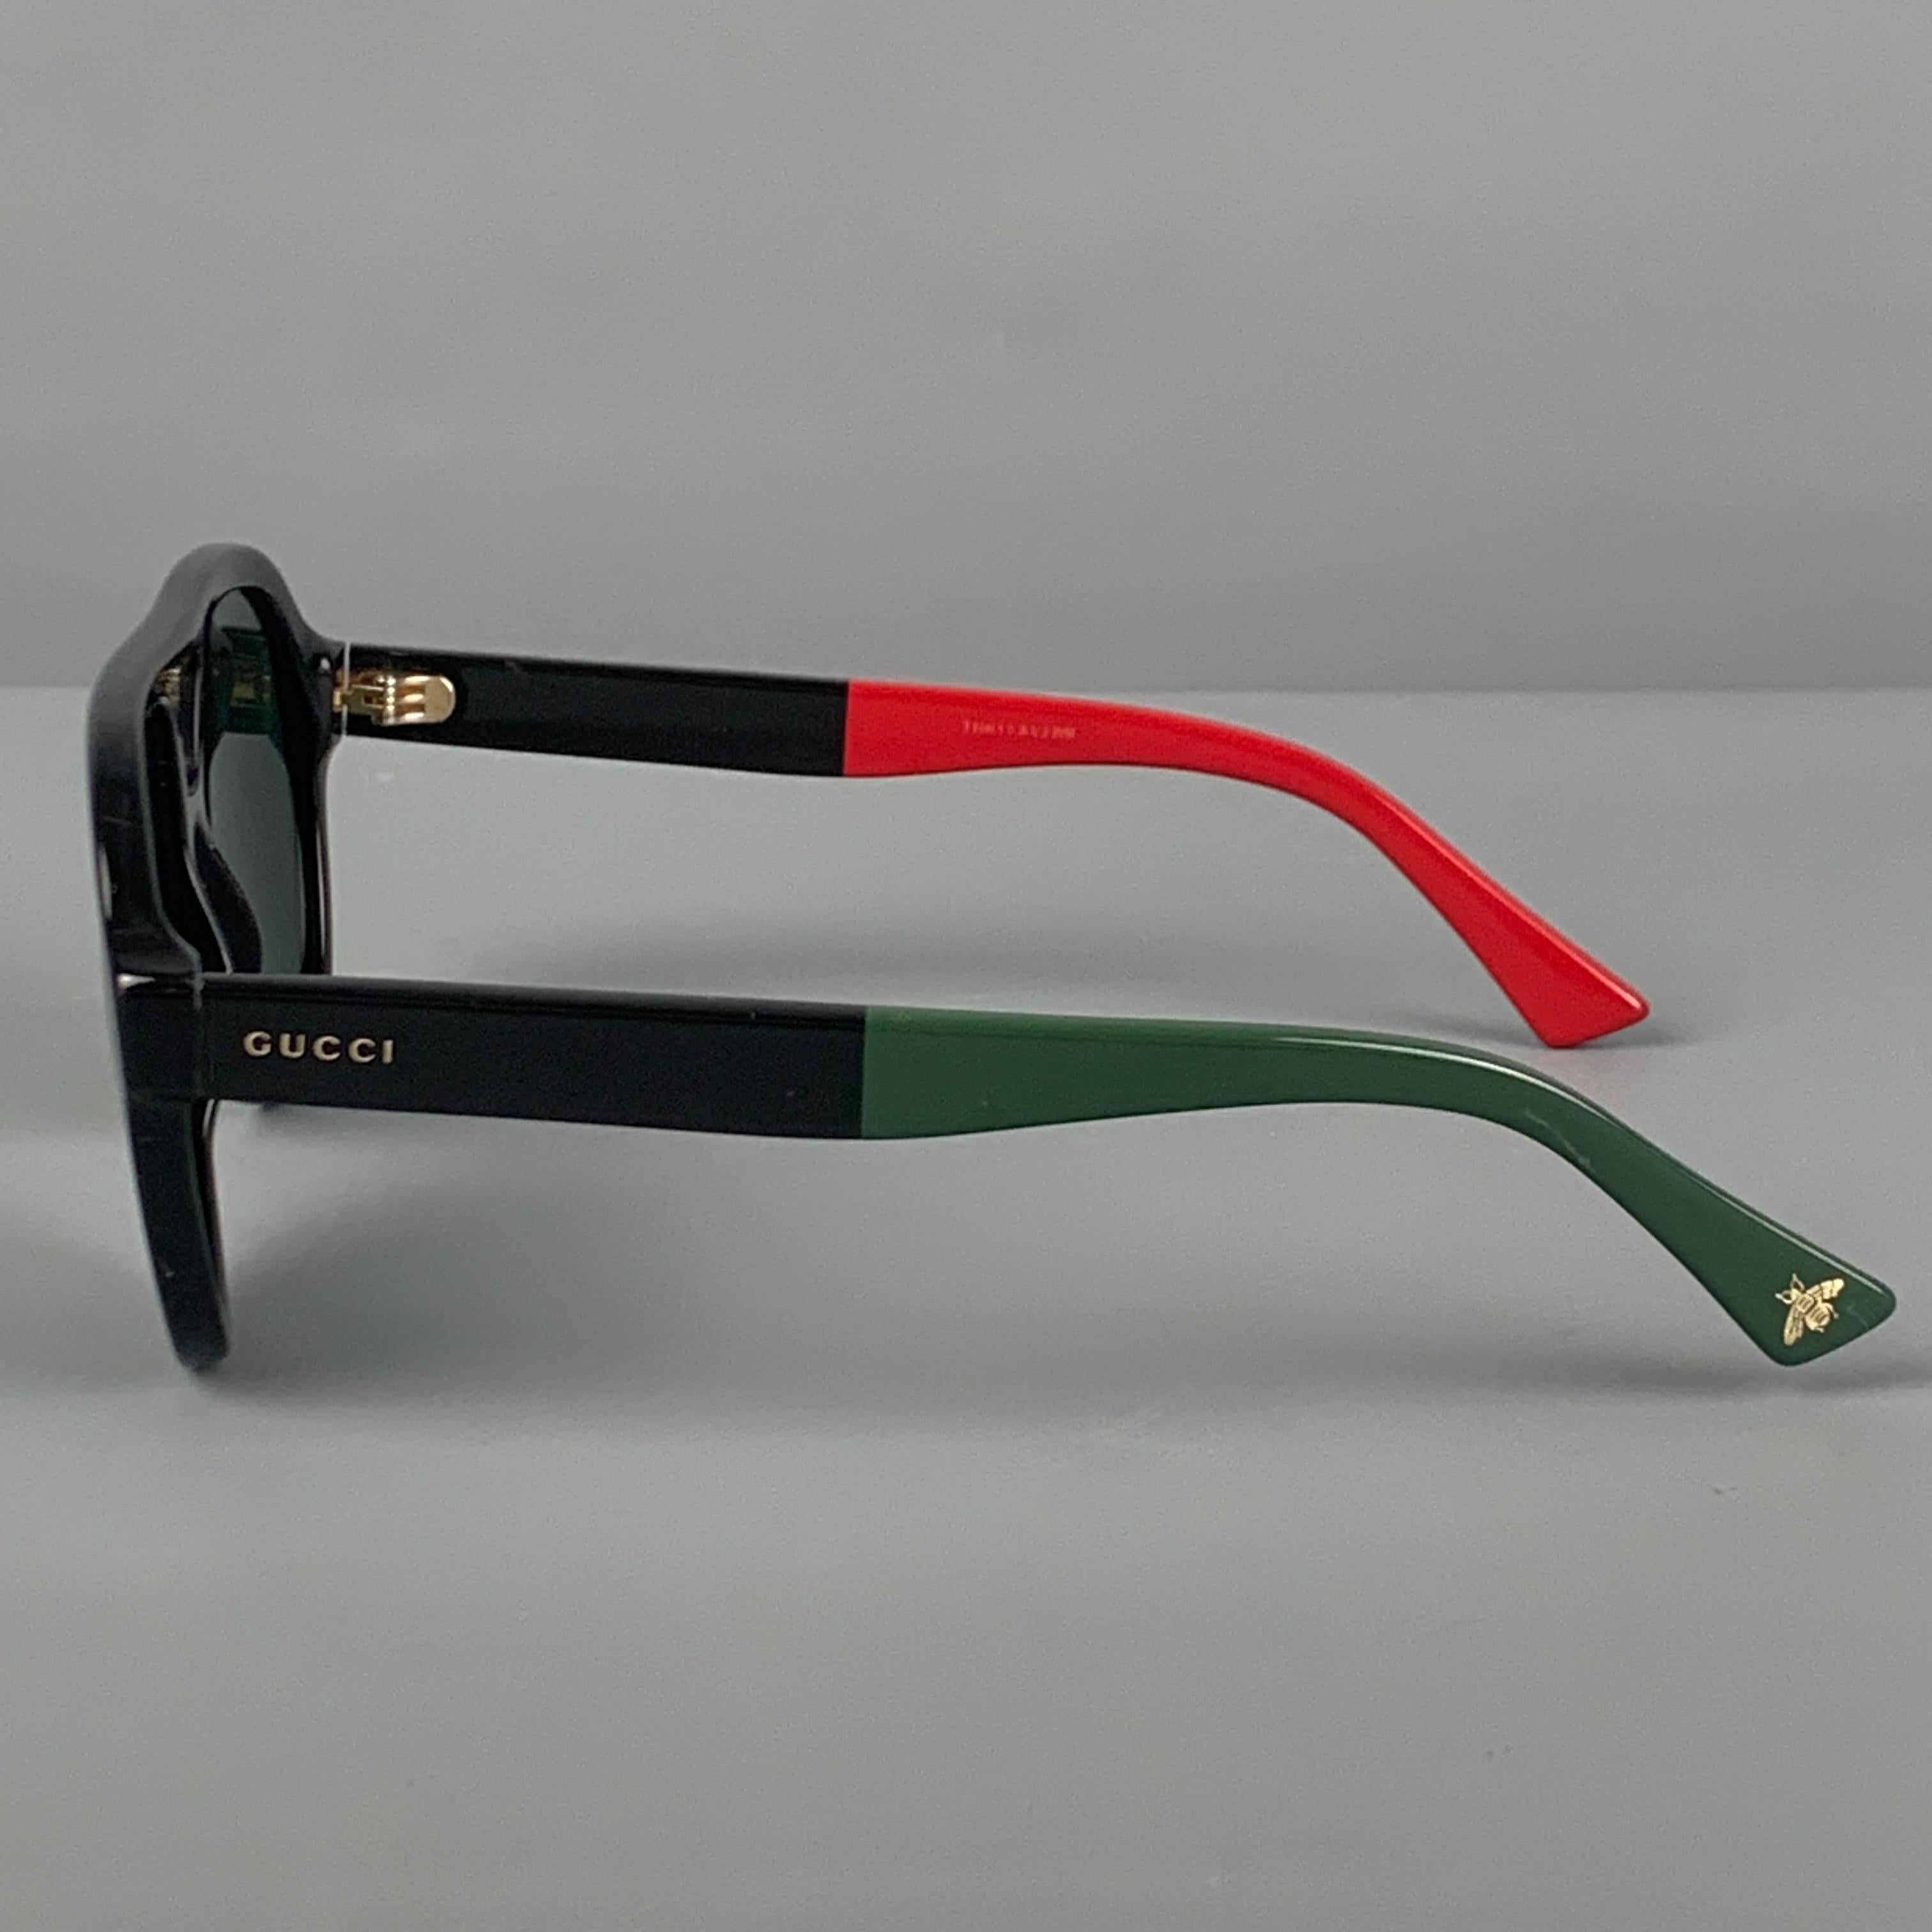 gucci sunglasses green and red sides